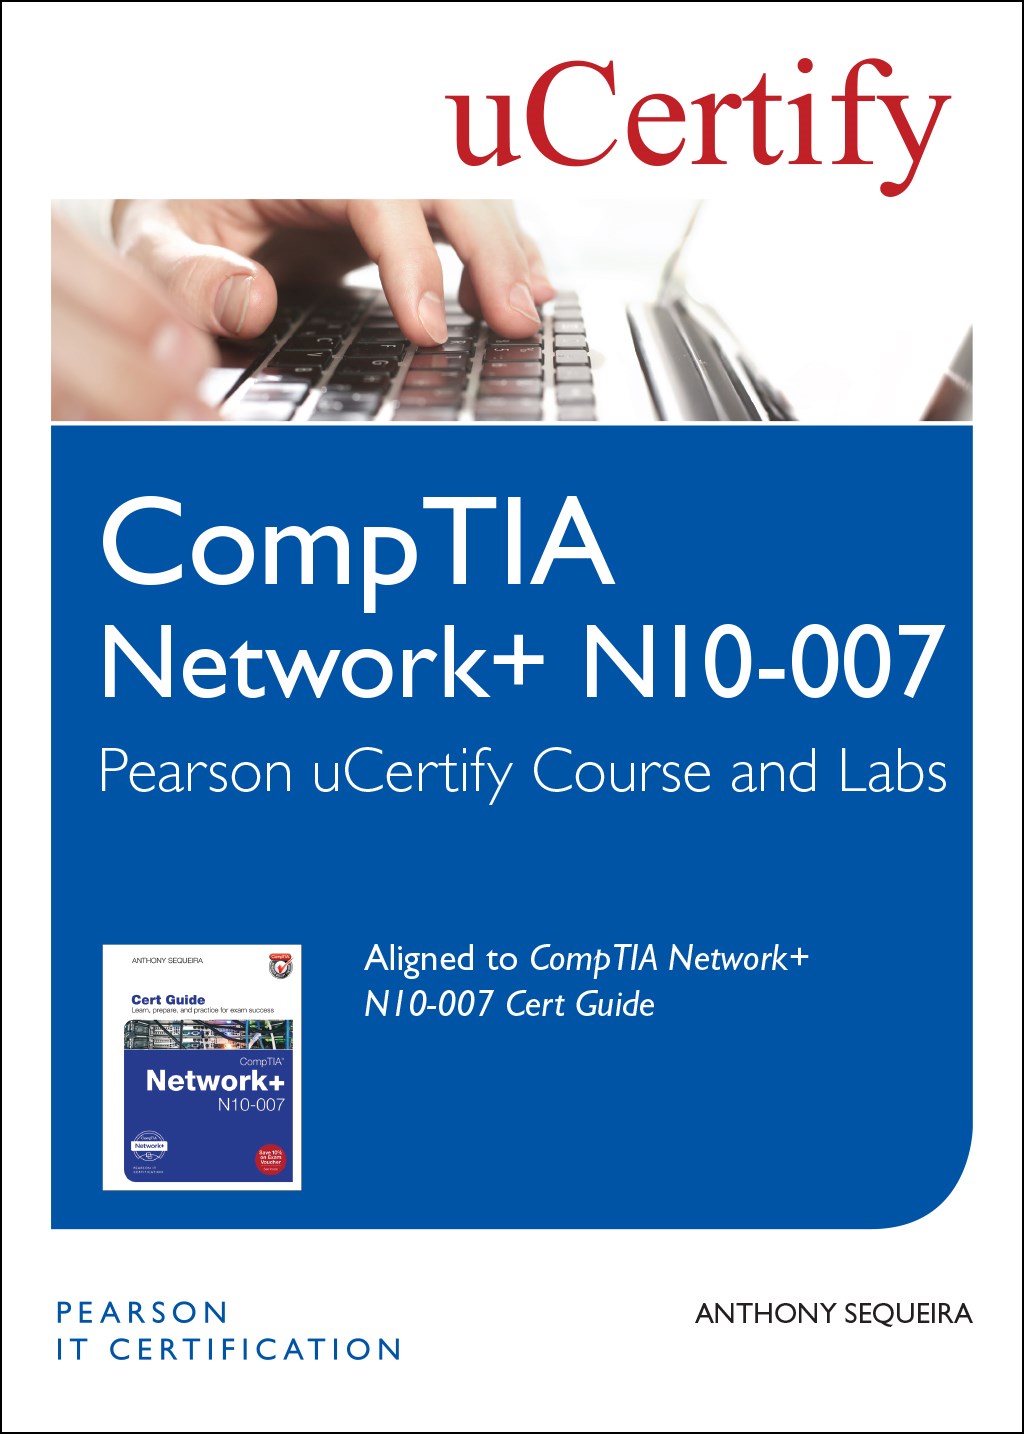 CompTIA Network+ N10-007 Pearson uCertify Course and Labs Student Access Card